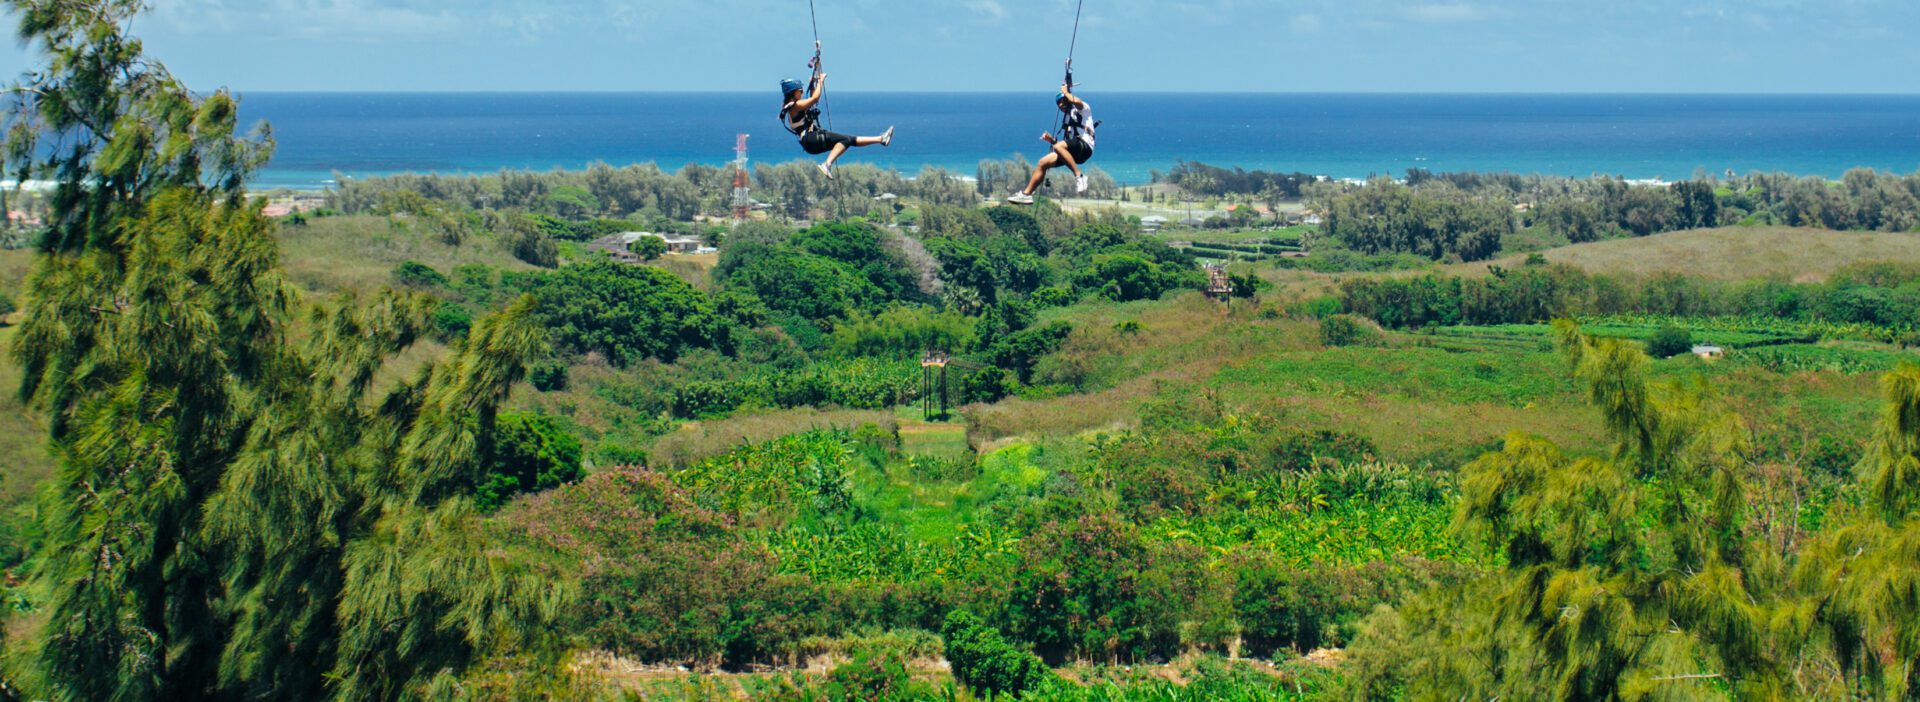 How We Keep You Safe During Your Oahu Zipline Adventure